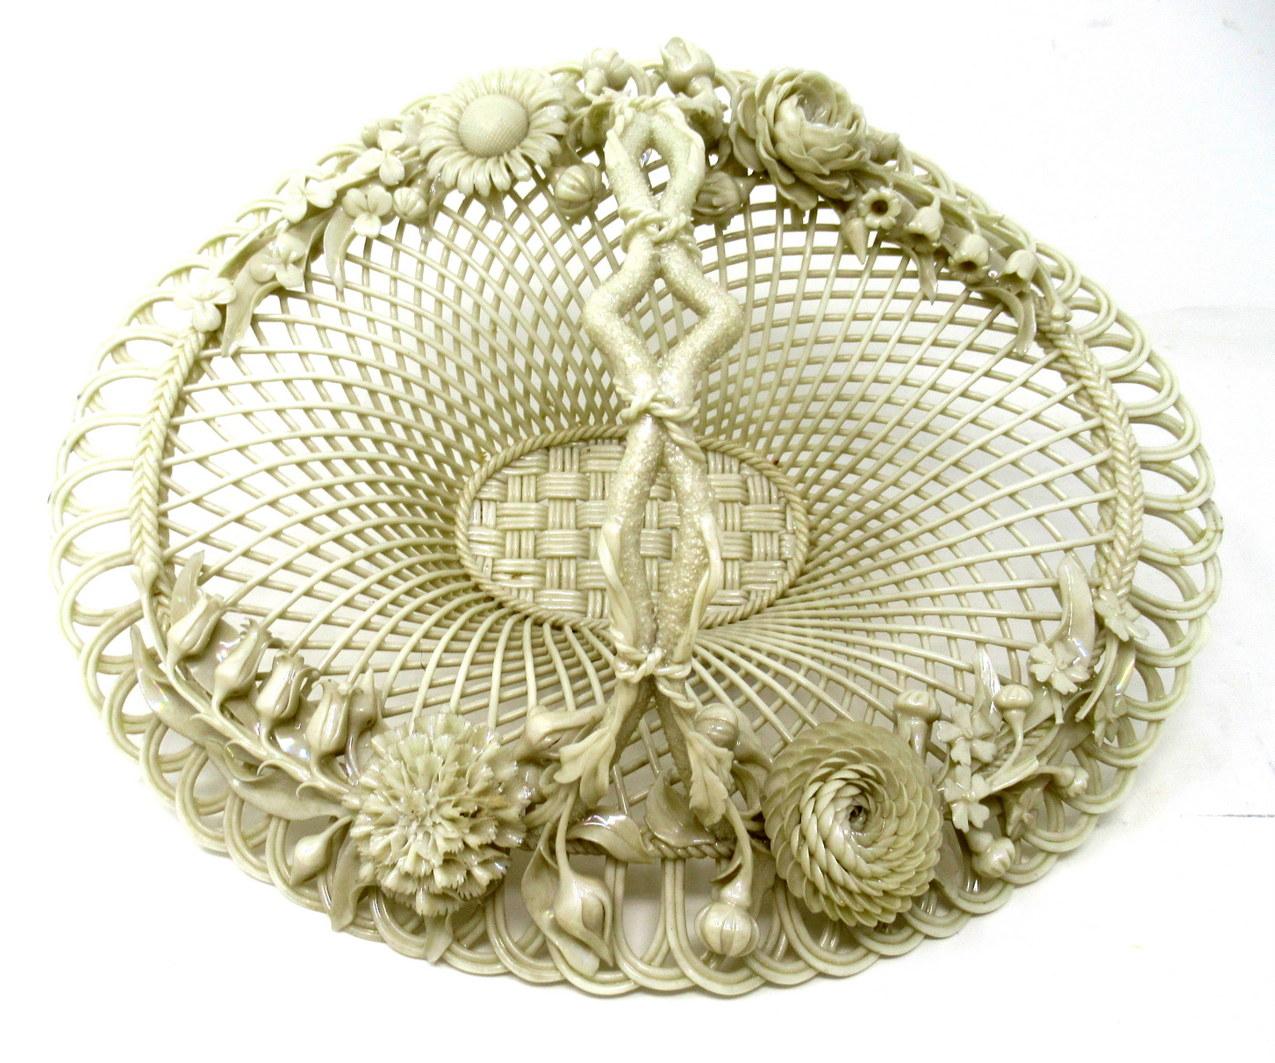 Stunning Example of an extremely rare Irish Belleek Porcelain Flower Encrusted Four Strand Basket of oval form. Nineteenth Century. 
This exceptional Belleek porcelain basket is an outstanding example of the delicate artistry for which this